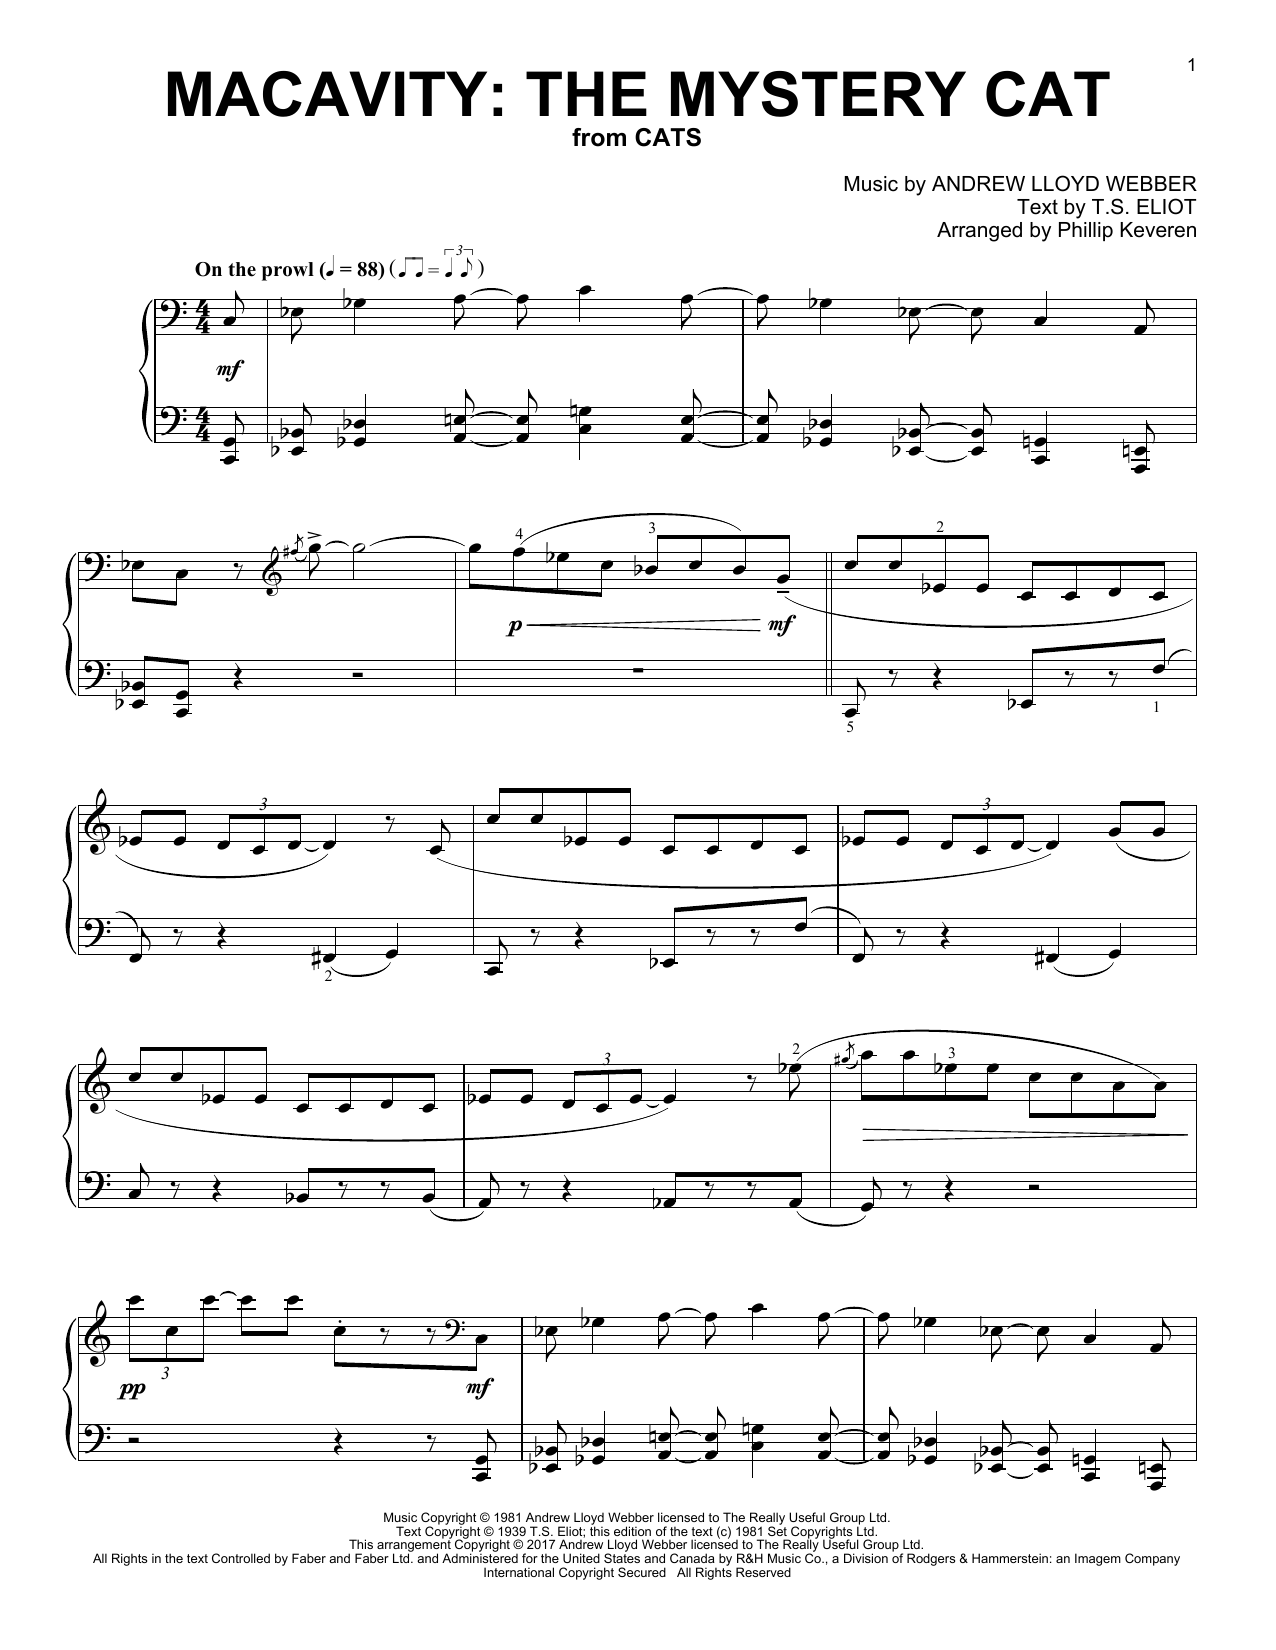 Andrew Lloyd Webber Macavity The Mystery Cat From Cats Arr Phillip Keveren Sheet Music Pdf Notes Chords Musical Show Score Piano Solo Download Printable Sku 189587